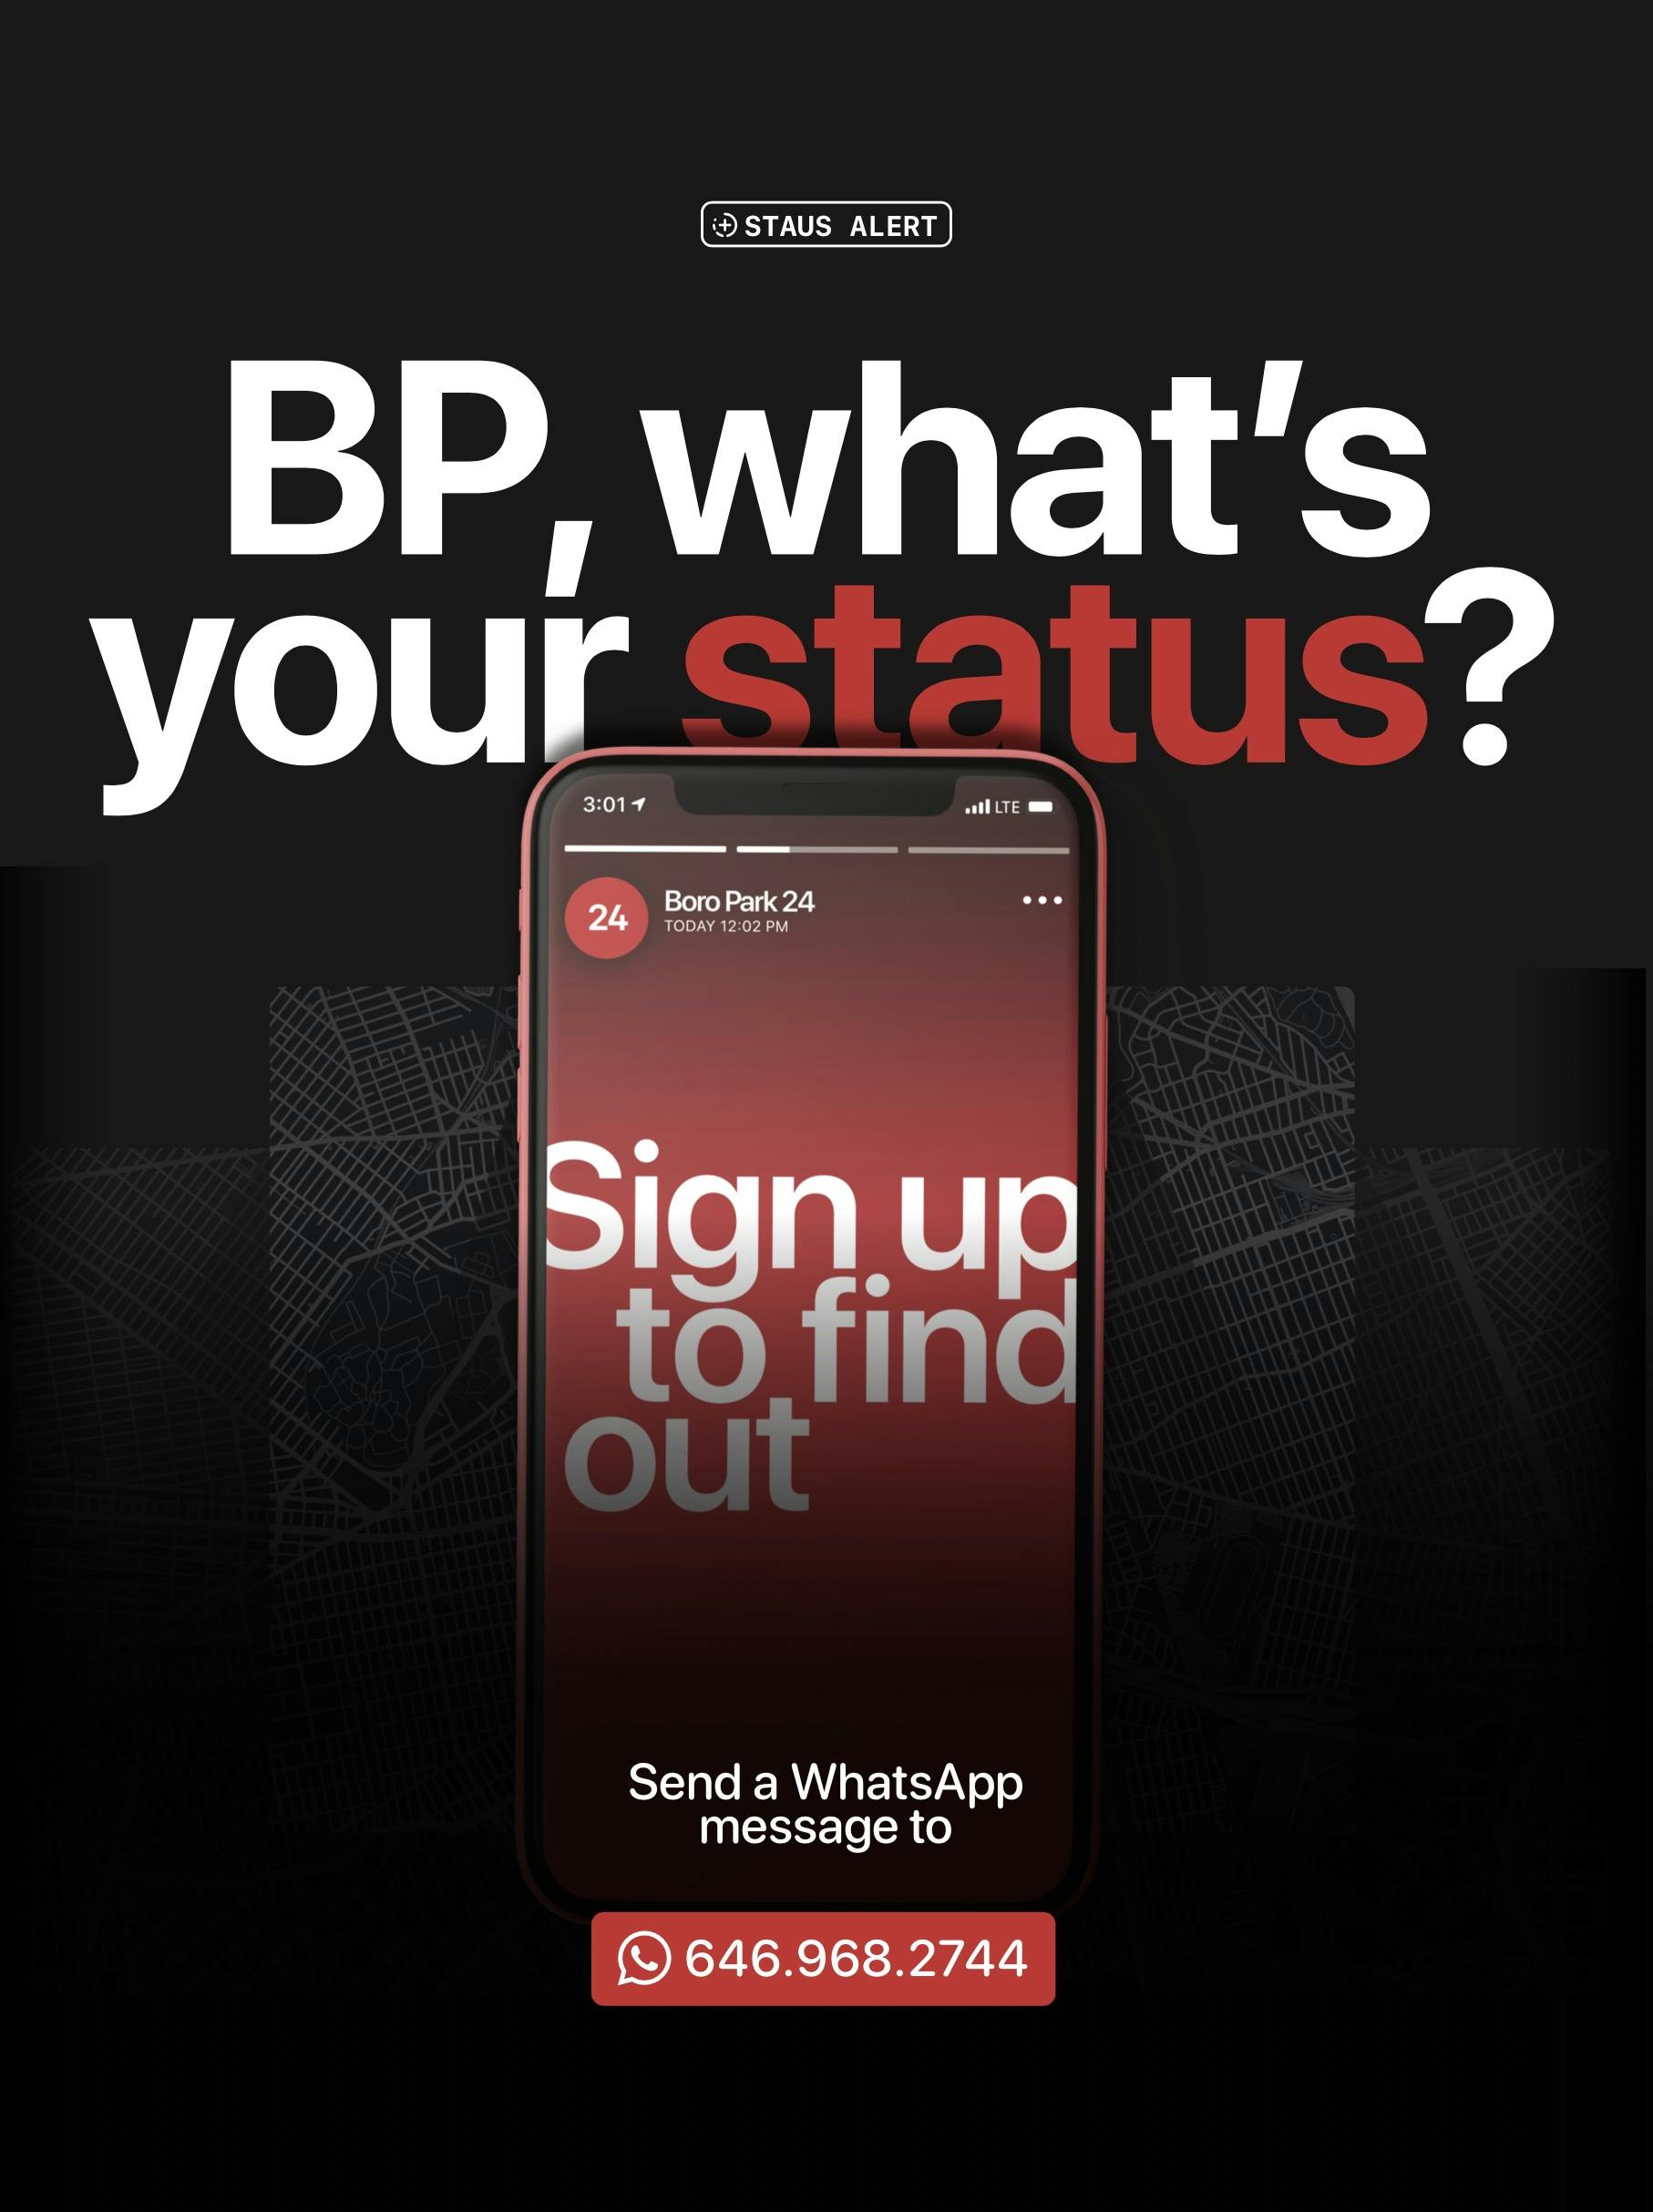 Poster asking BP, what's your status, and a screenshot of an iPhone with the Boro Park 24 logo.